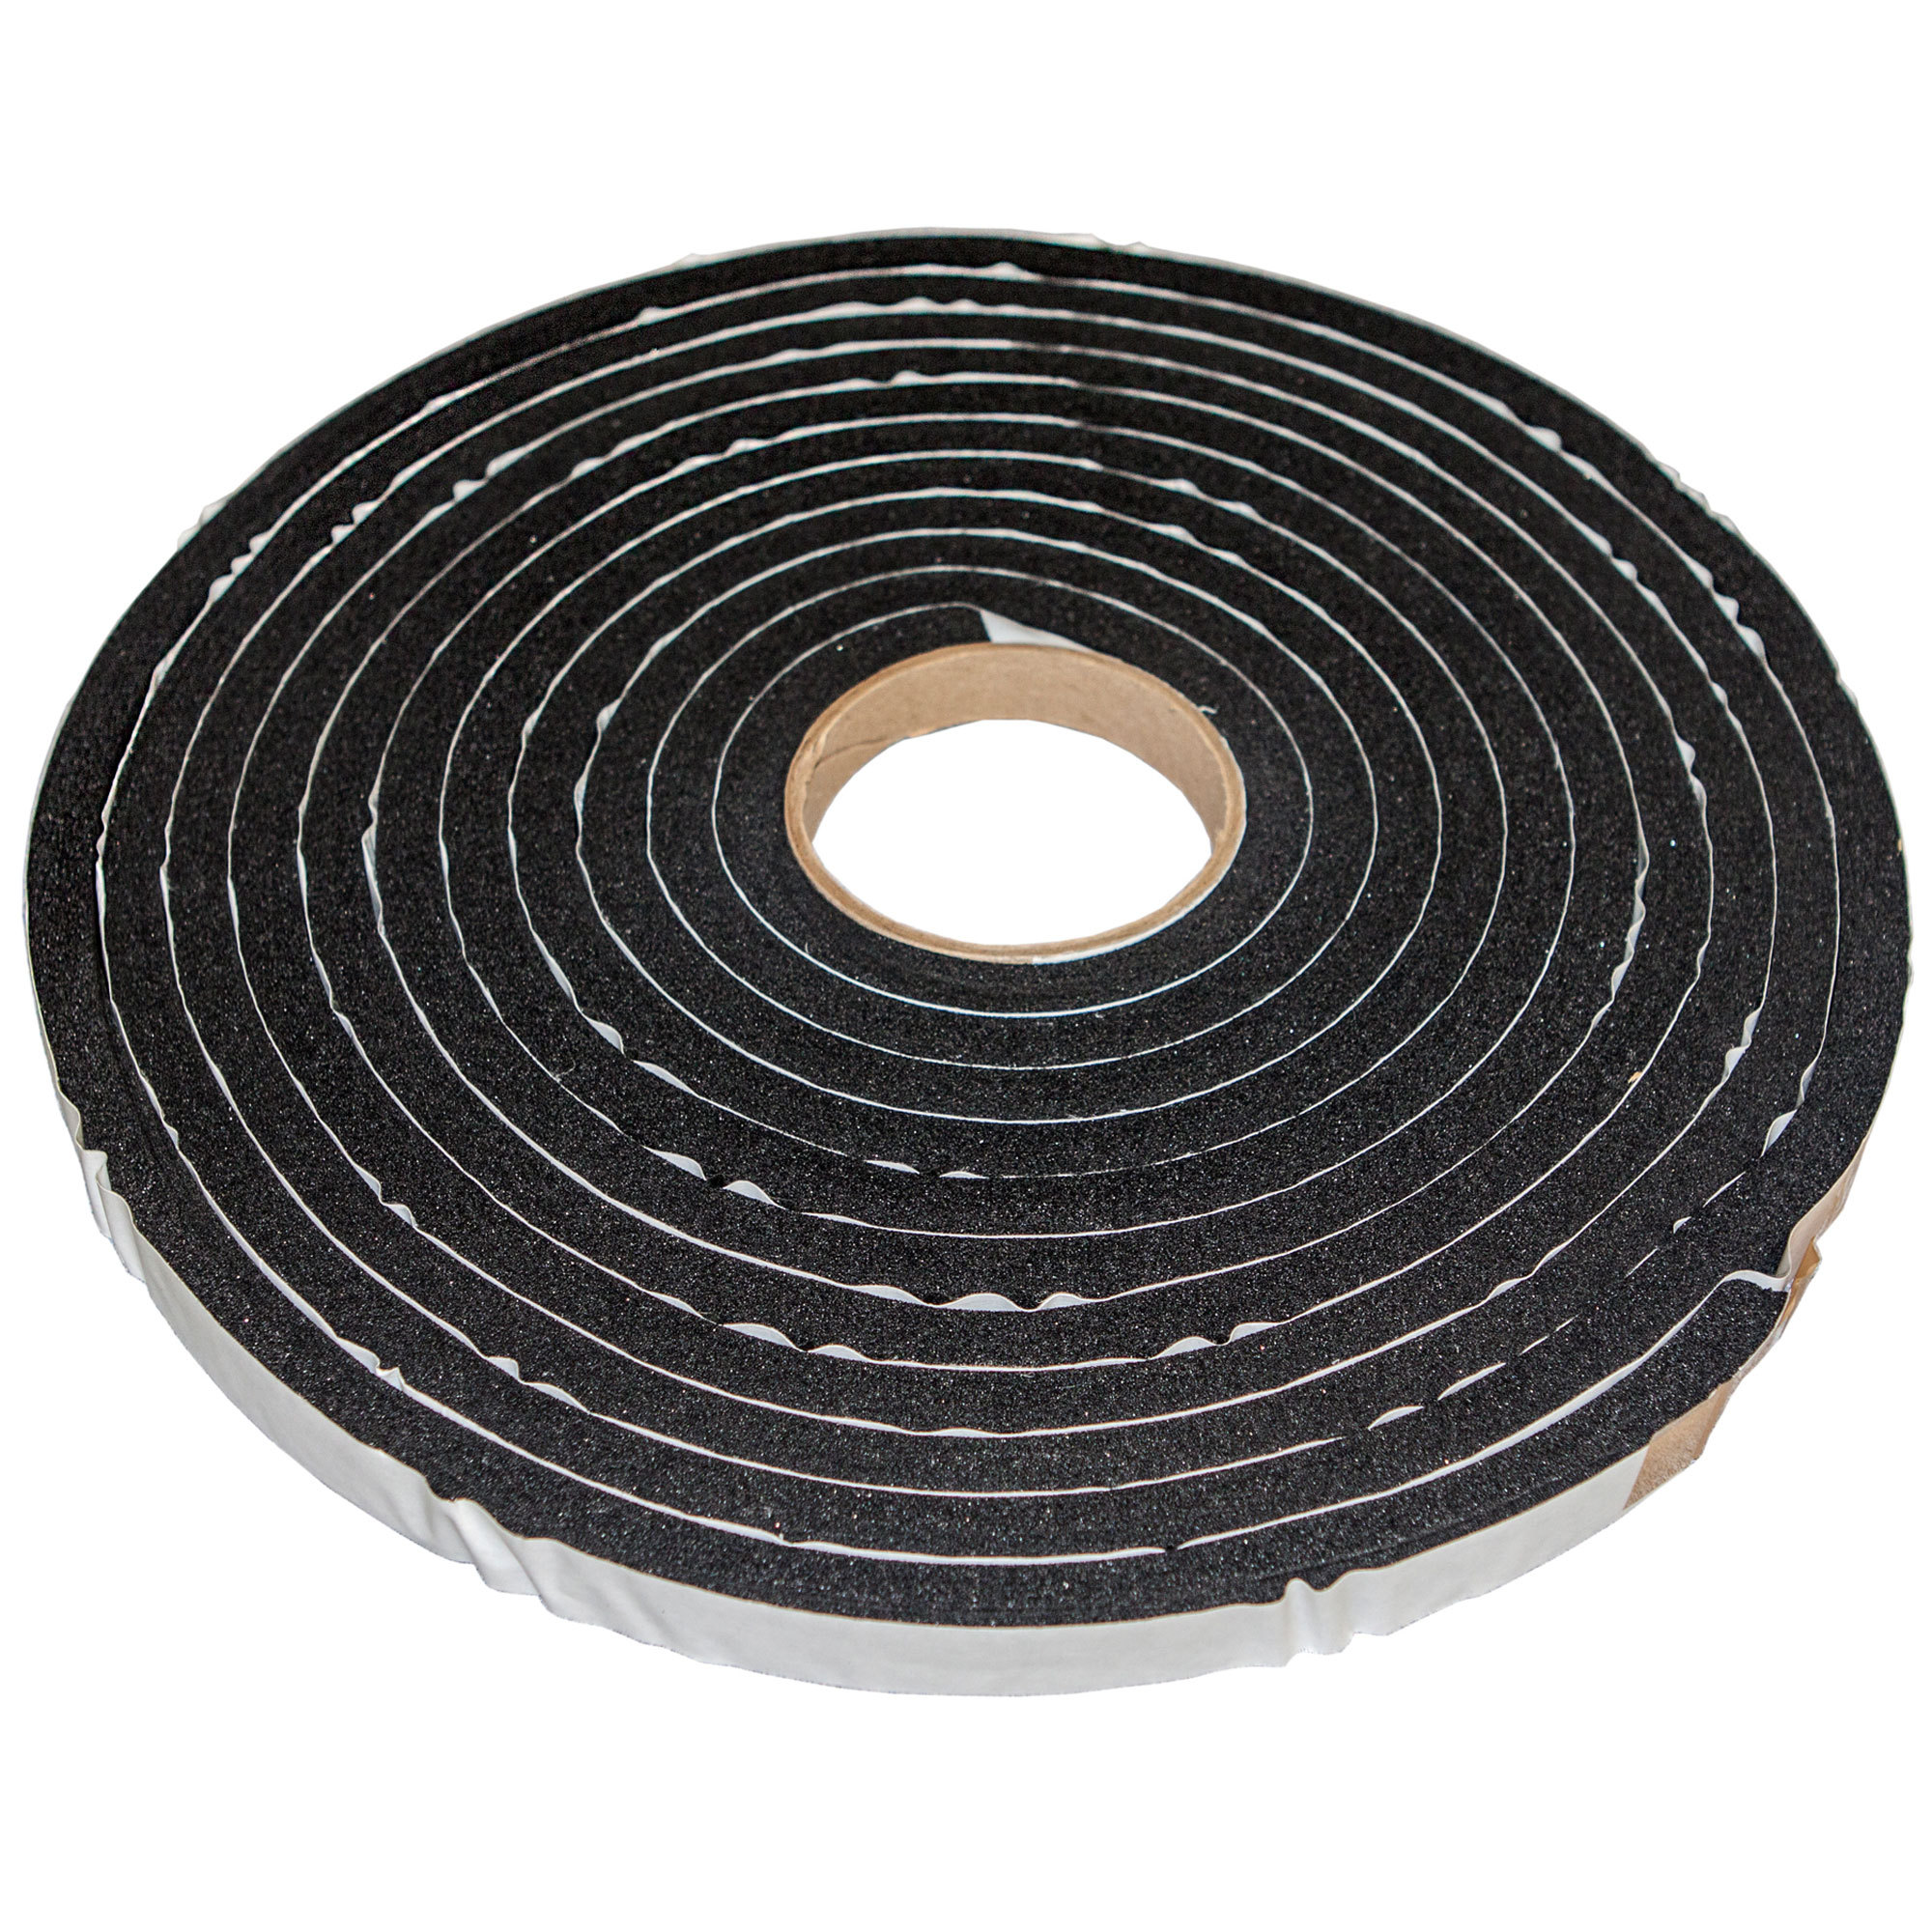 WD-GASKET WATTS 25&#39; ROLL OF GASKET TAPE FOR GREASE